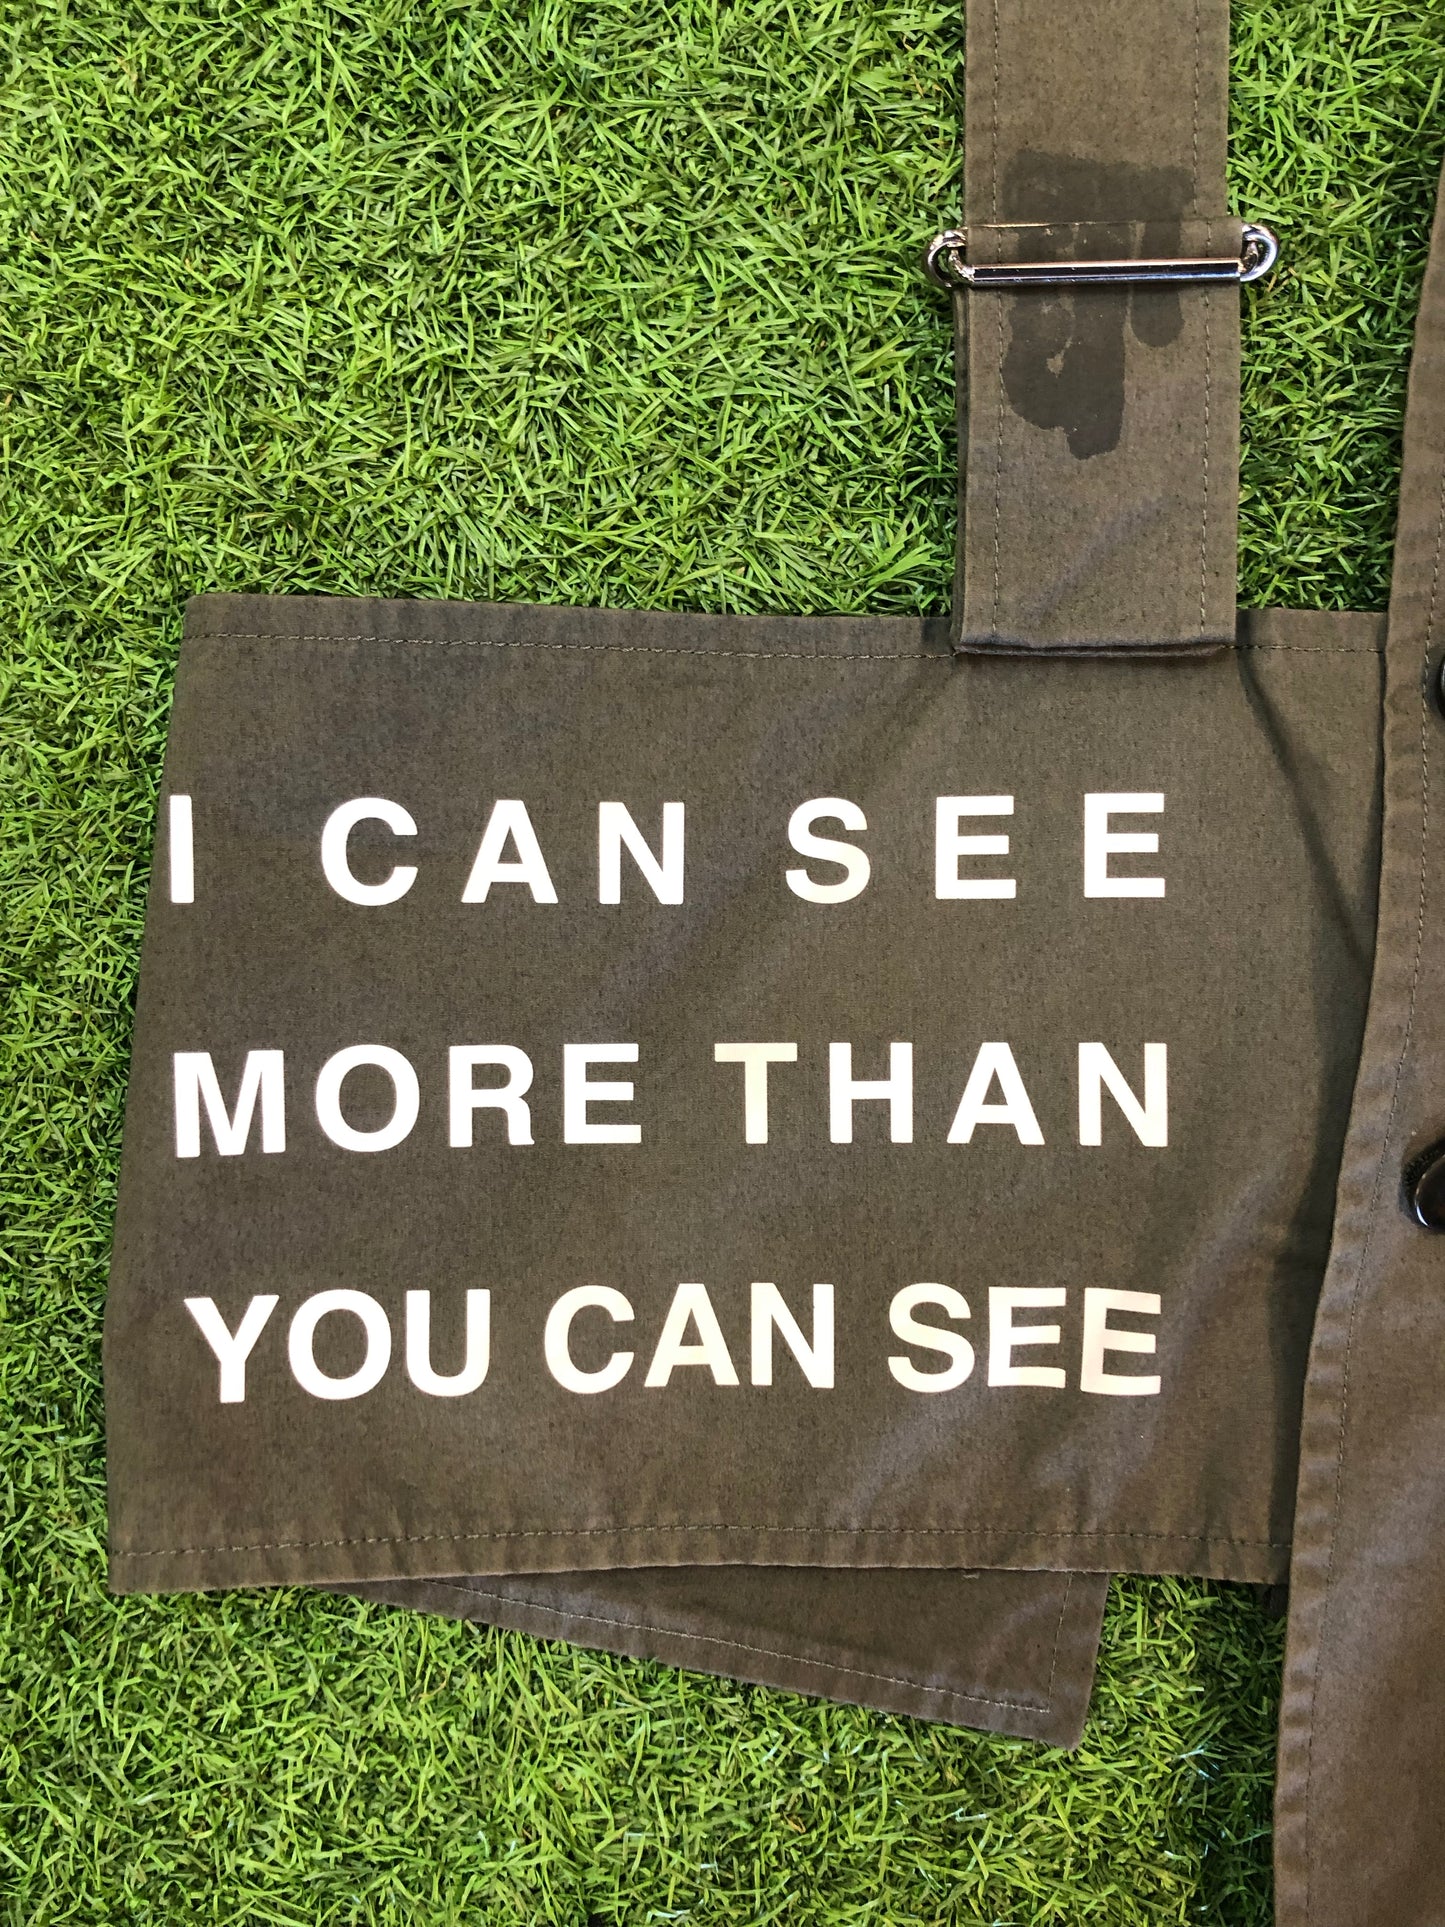 Undercover Asymmetrical Half Military "I Can See More Than You Can See" Vest